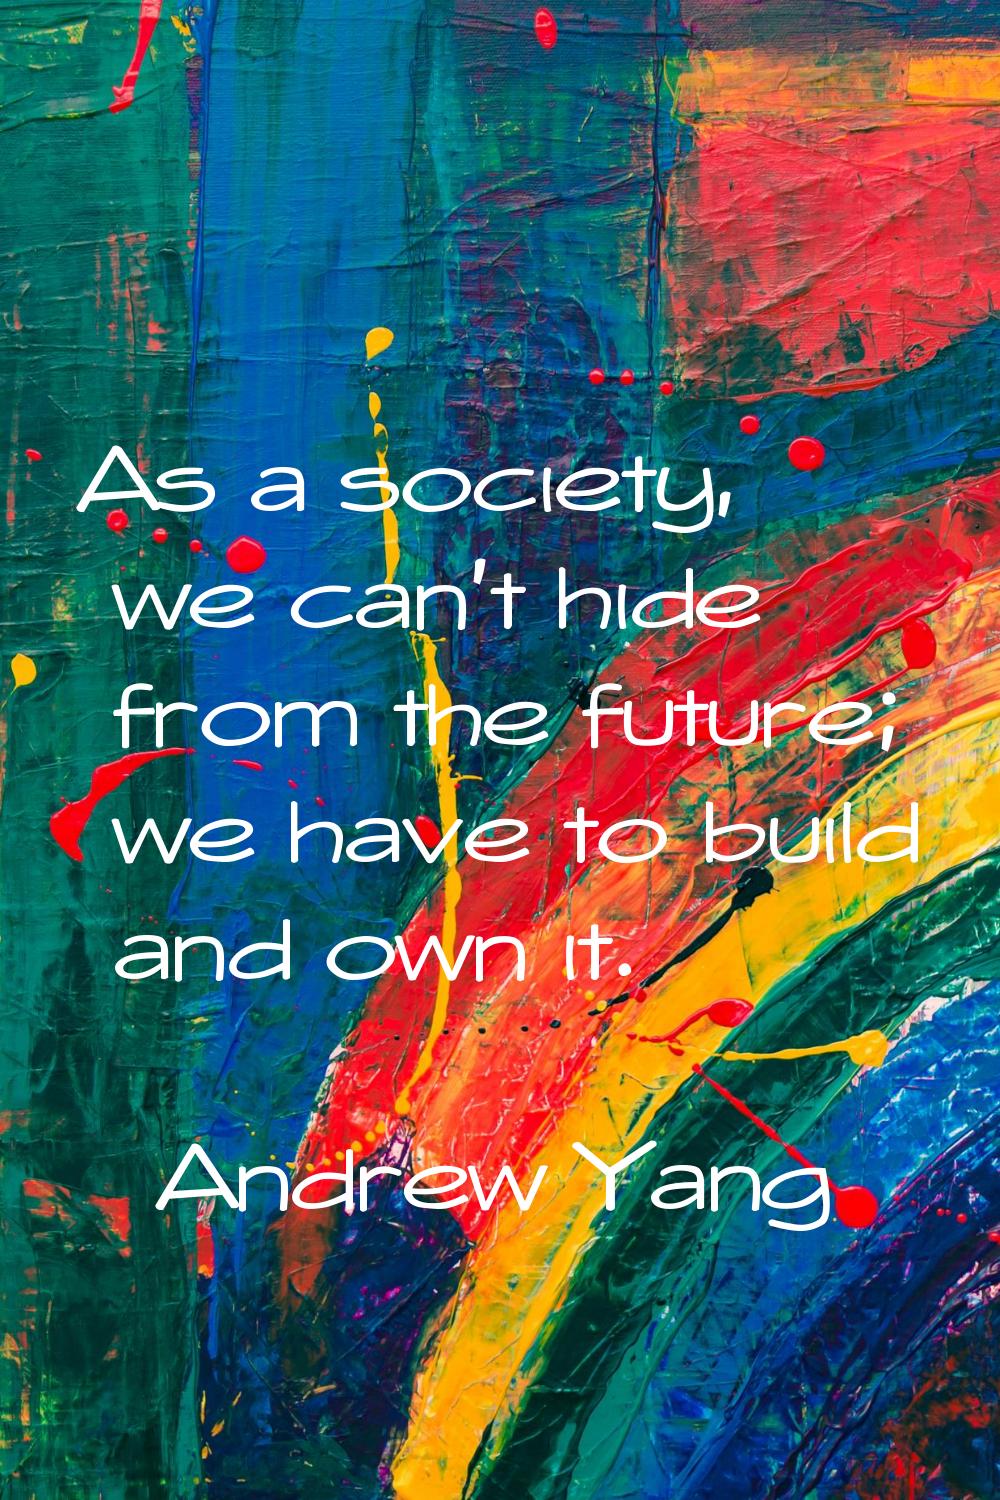 As a society, we can't hide from the future; we have to build and own it.